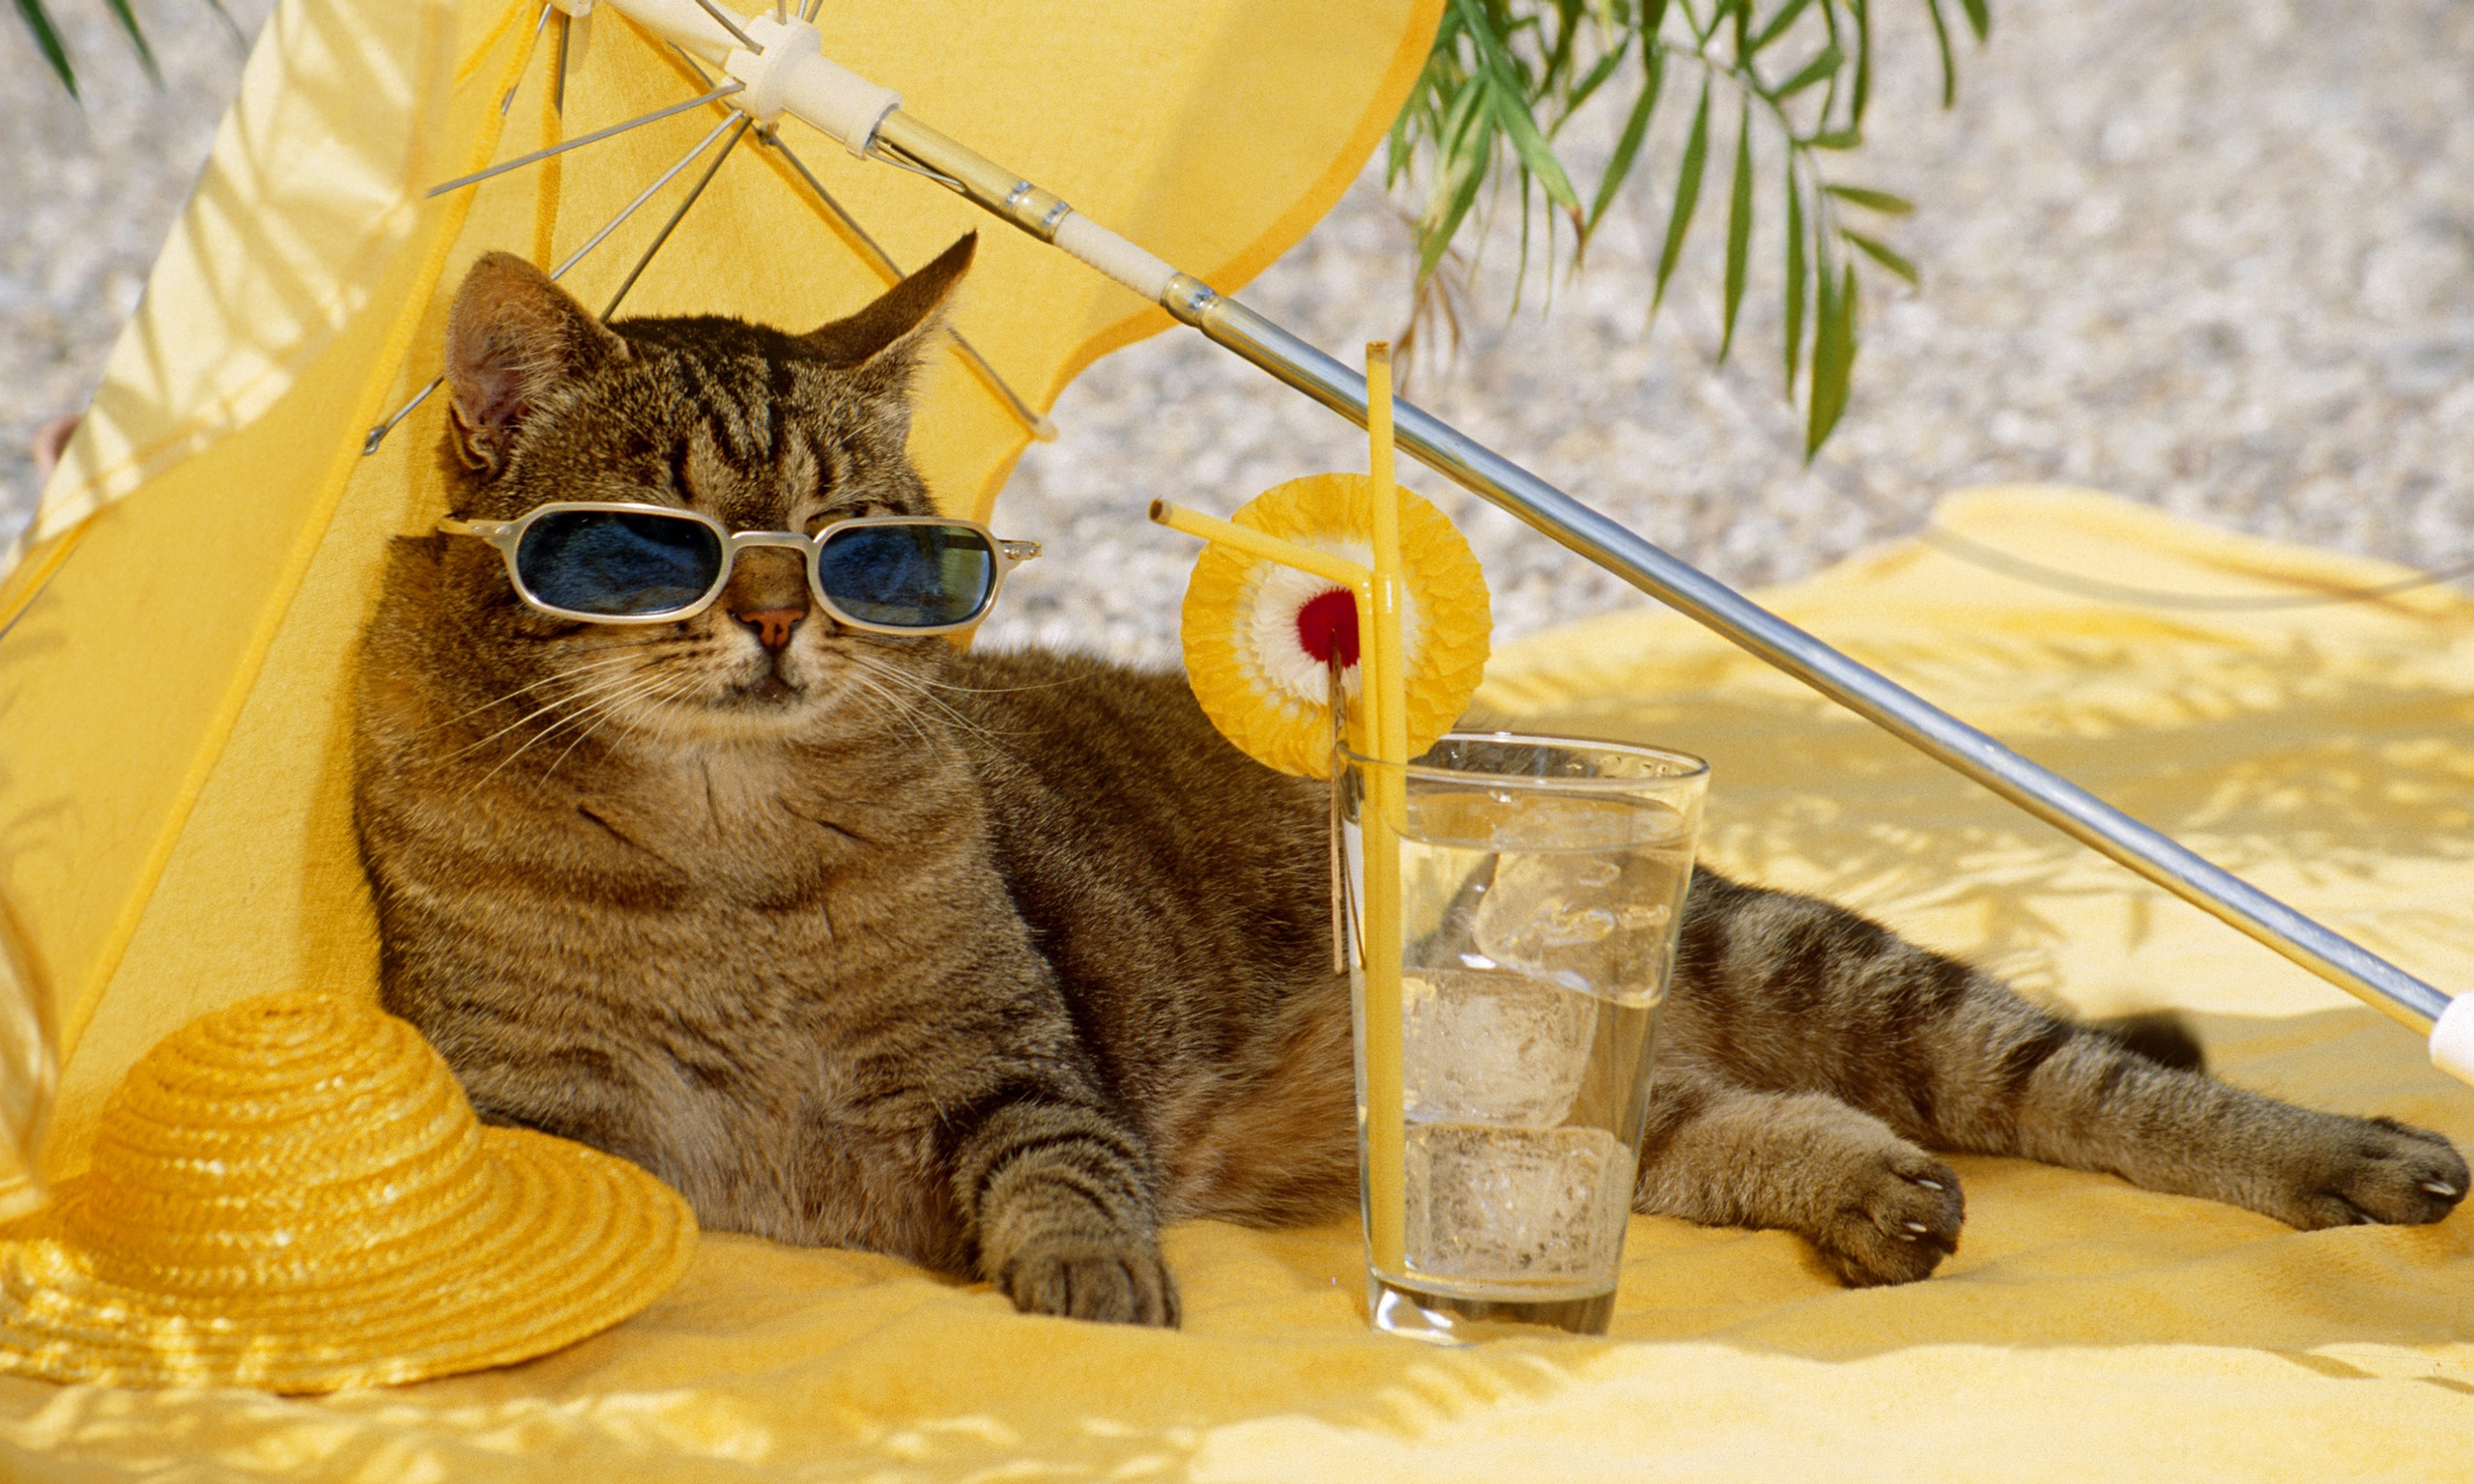 https://static-secure.guim.co.uk/sys-images/Guardian/Pix/pictures/2014/6/13/1402664441891/tabby-cat---with-sun-glas-014.jpg